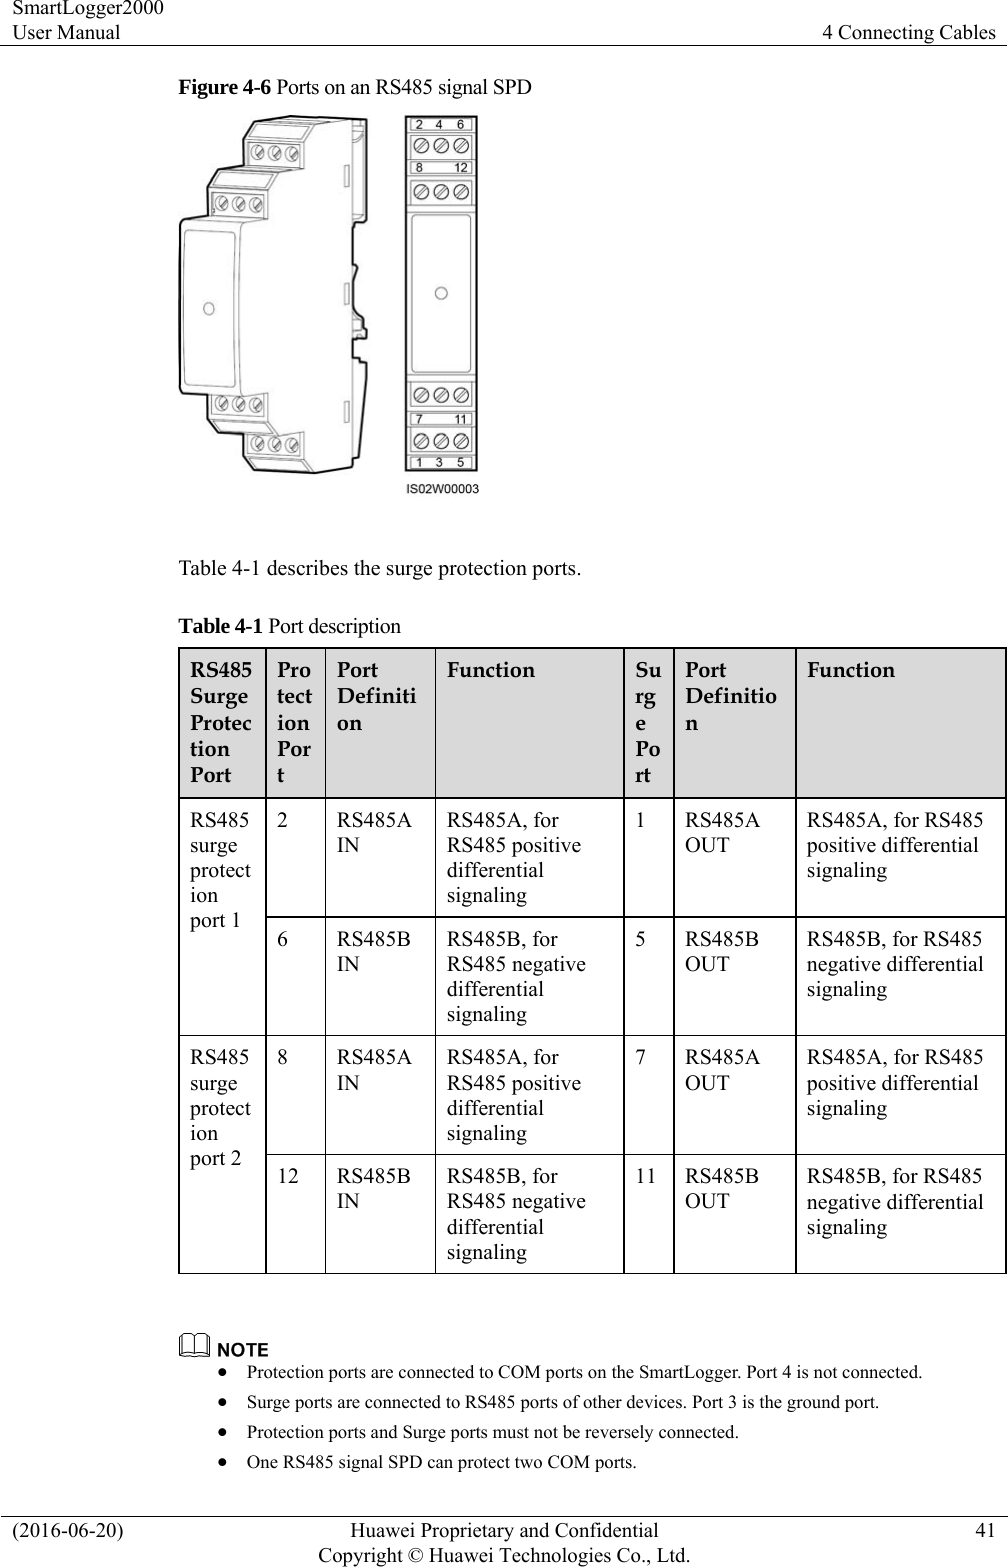 SmartLogger2000 User Manual  4 Connecting Cables (2016-06-20)  Huawei Proprietary and Confidential         Copyright © Huawei Technologies Co., Ltd.41 Figure 4-6 Ports on an RS485 signal SPD   Table 4-1 describes the surge protection ports. Table 4-1 Port description RS485 Surge Protection Port Protection Port Port Definition Function  Surge Port Port Definition Function RS485 surge protection port 1 2 RS485A IN RS485A, for RS485 positive differential signaling 1 RS485A OUT RS485A, for RS485 positive differential signaling 6 RS485B IN RS485B, for RS485 negative differential signaling 5 RS485B OUT RS485B, for RS485 negative differential signaling RS485 surge protection port 2 8 RS485A IN RS485A, for RS485 positive differential signaling 7 RS485A OUT RS485A, for RS485 positive differential signaling 12 RS485B IN RS485B, for RS485 negative differential signaling 11 RS485B OUT RS485B, for RS485 negative differential signaling    Protection ports are connected to COM ports on the SmartLogger. Port 4 is not connected.  Surge ports are connected to RS485 ports of other devices. Port 3 is the ground port.    Protection ports and Surge ports must not be reversely connected.    One RS485 signal SPD can protect two COM ports.   